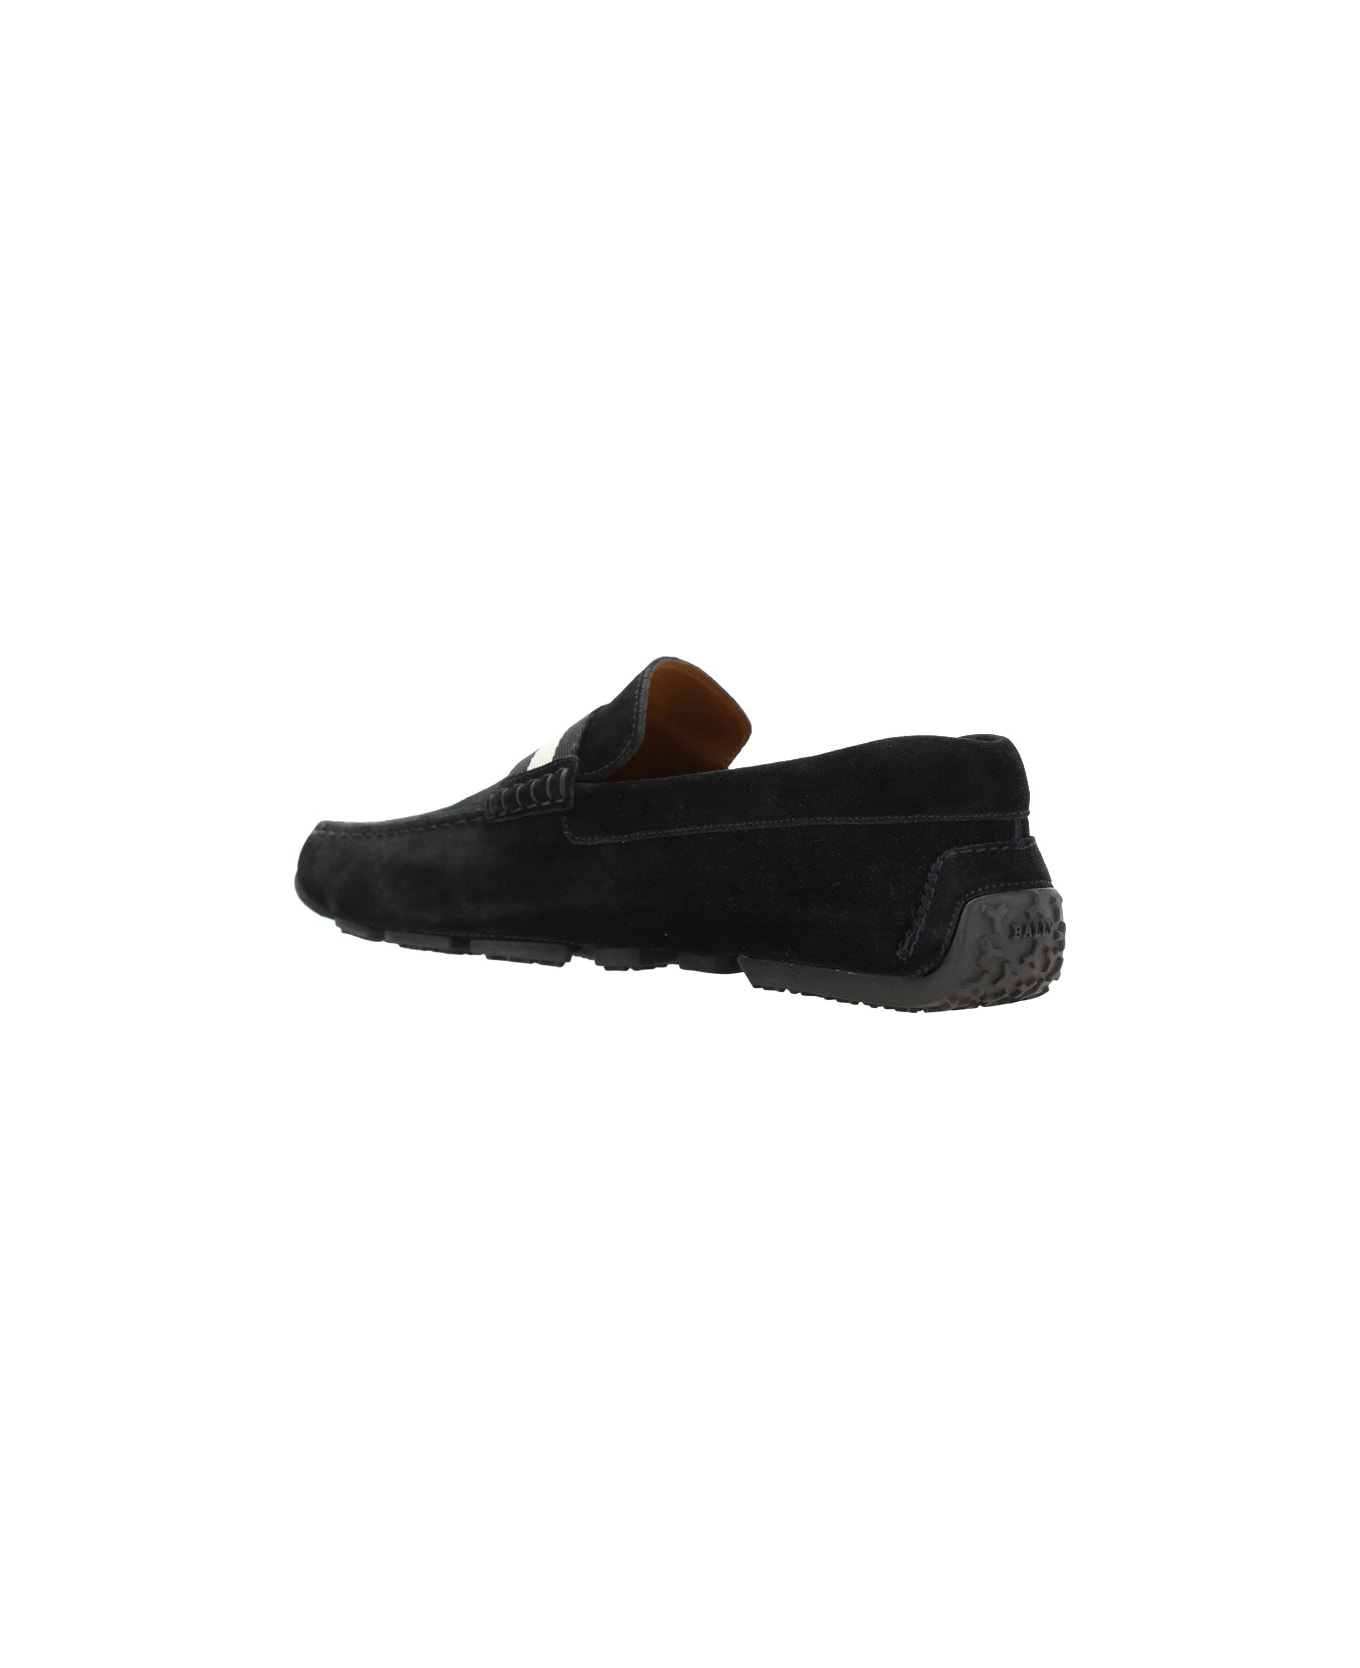 Bally Pearce Loafers - Black